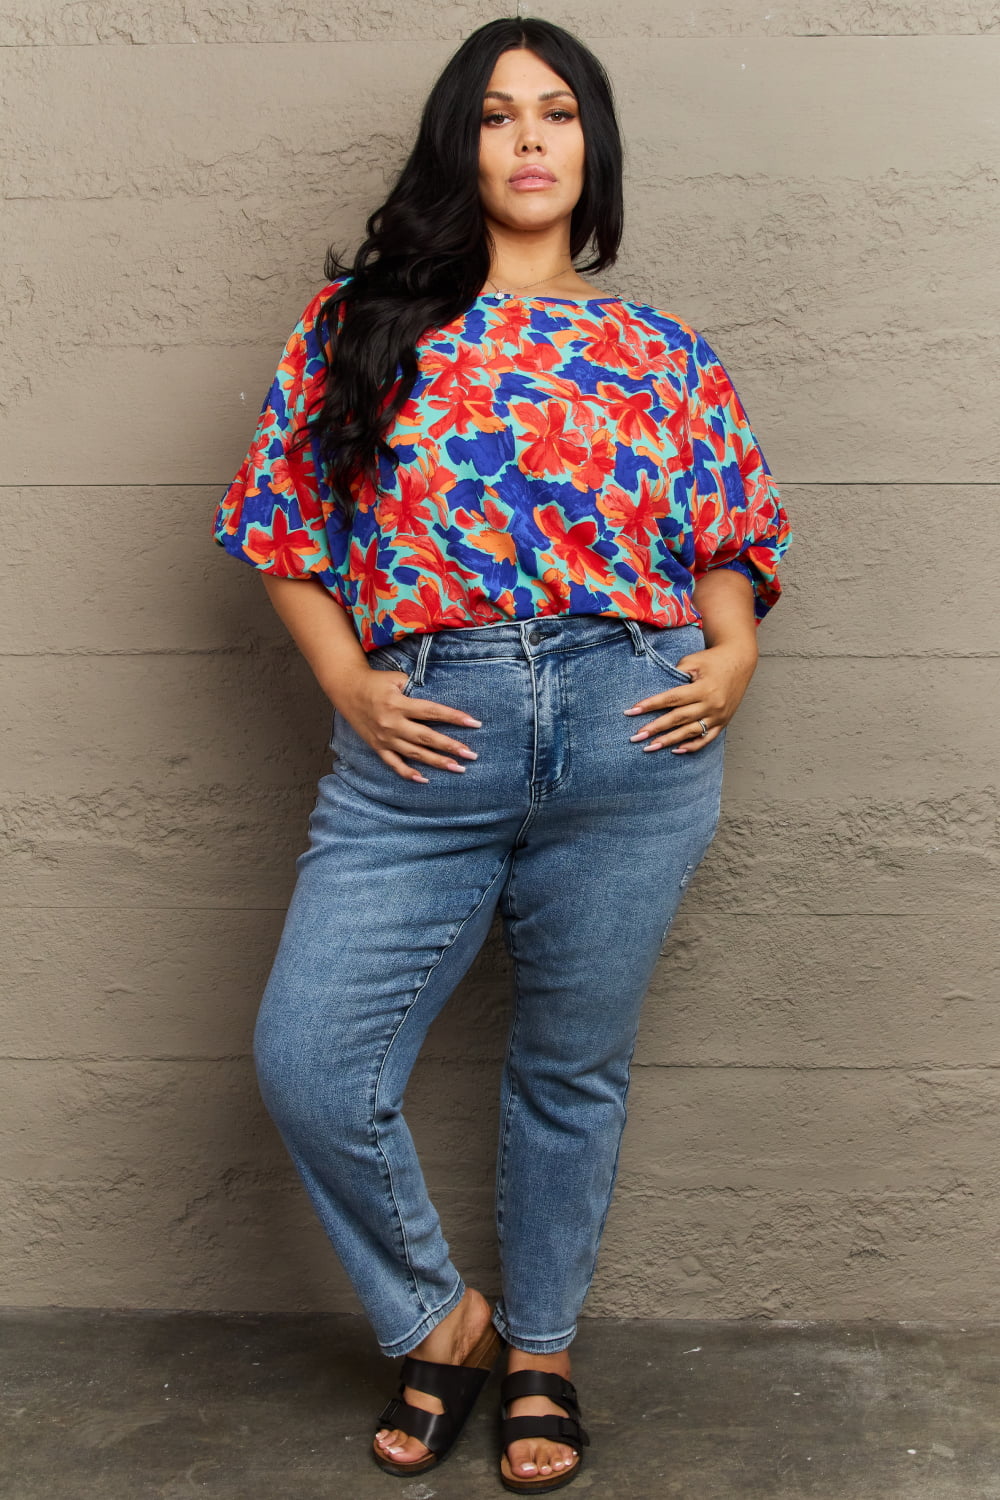 New Season Plus Size Floral Blouse - Women’s Clothing & Accessories - Shirts & Tops - 4 - 2024